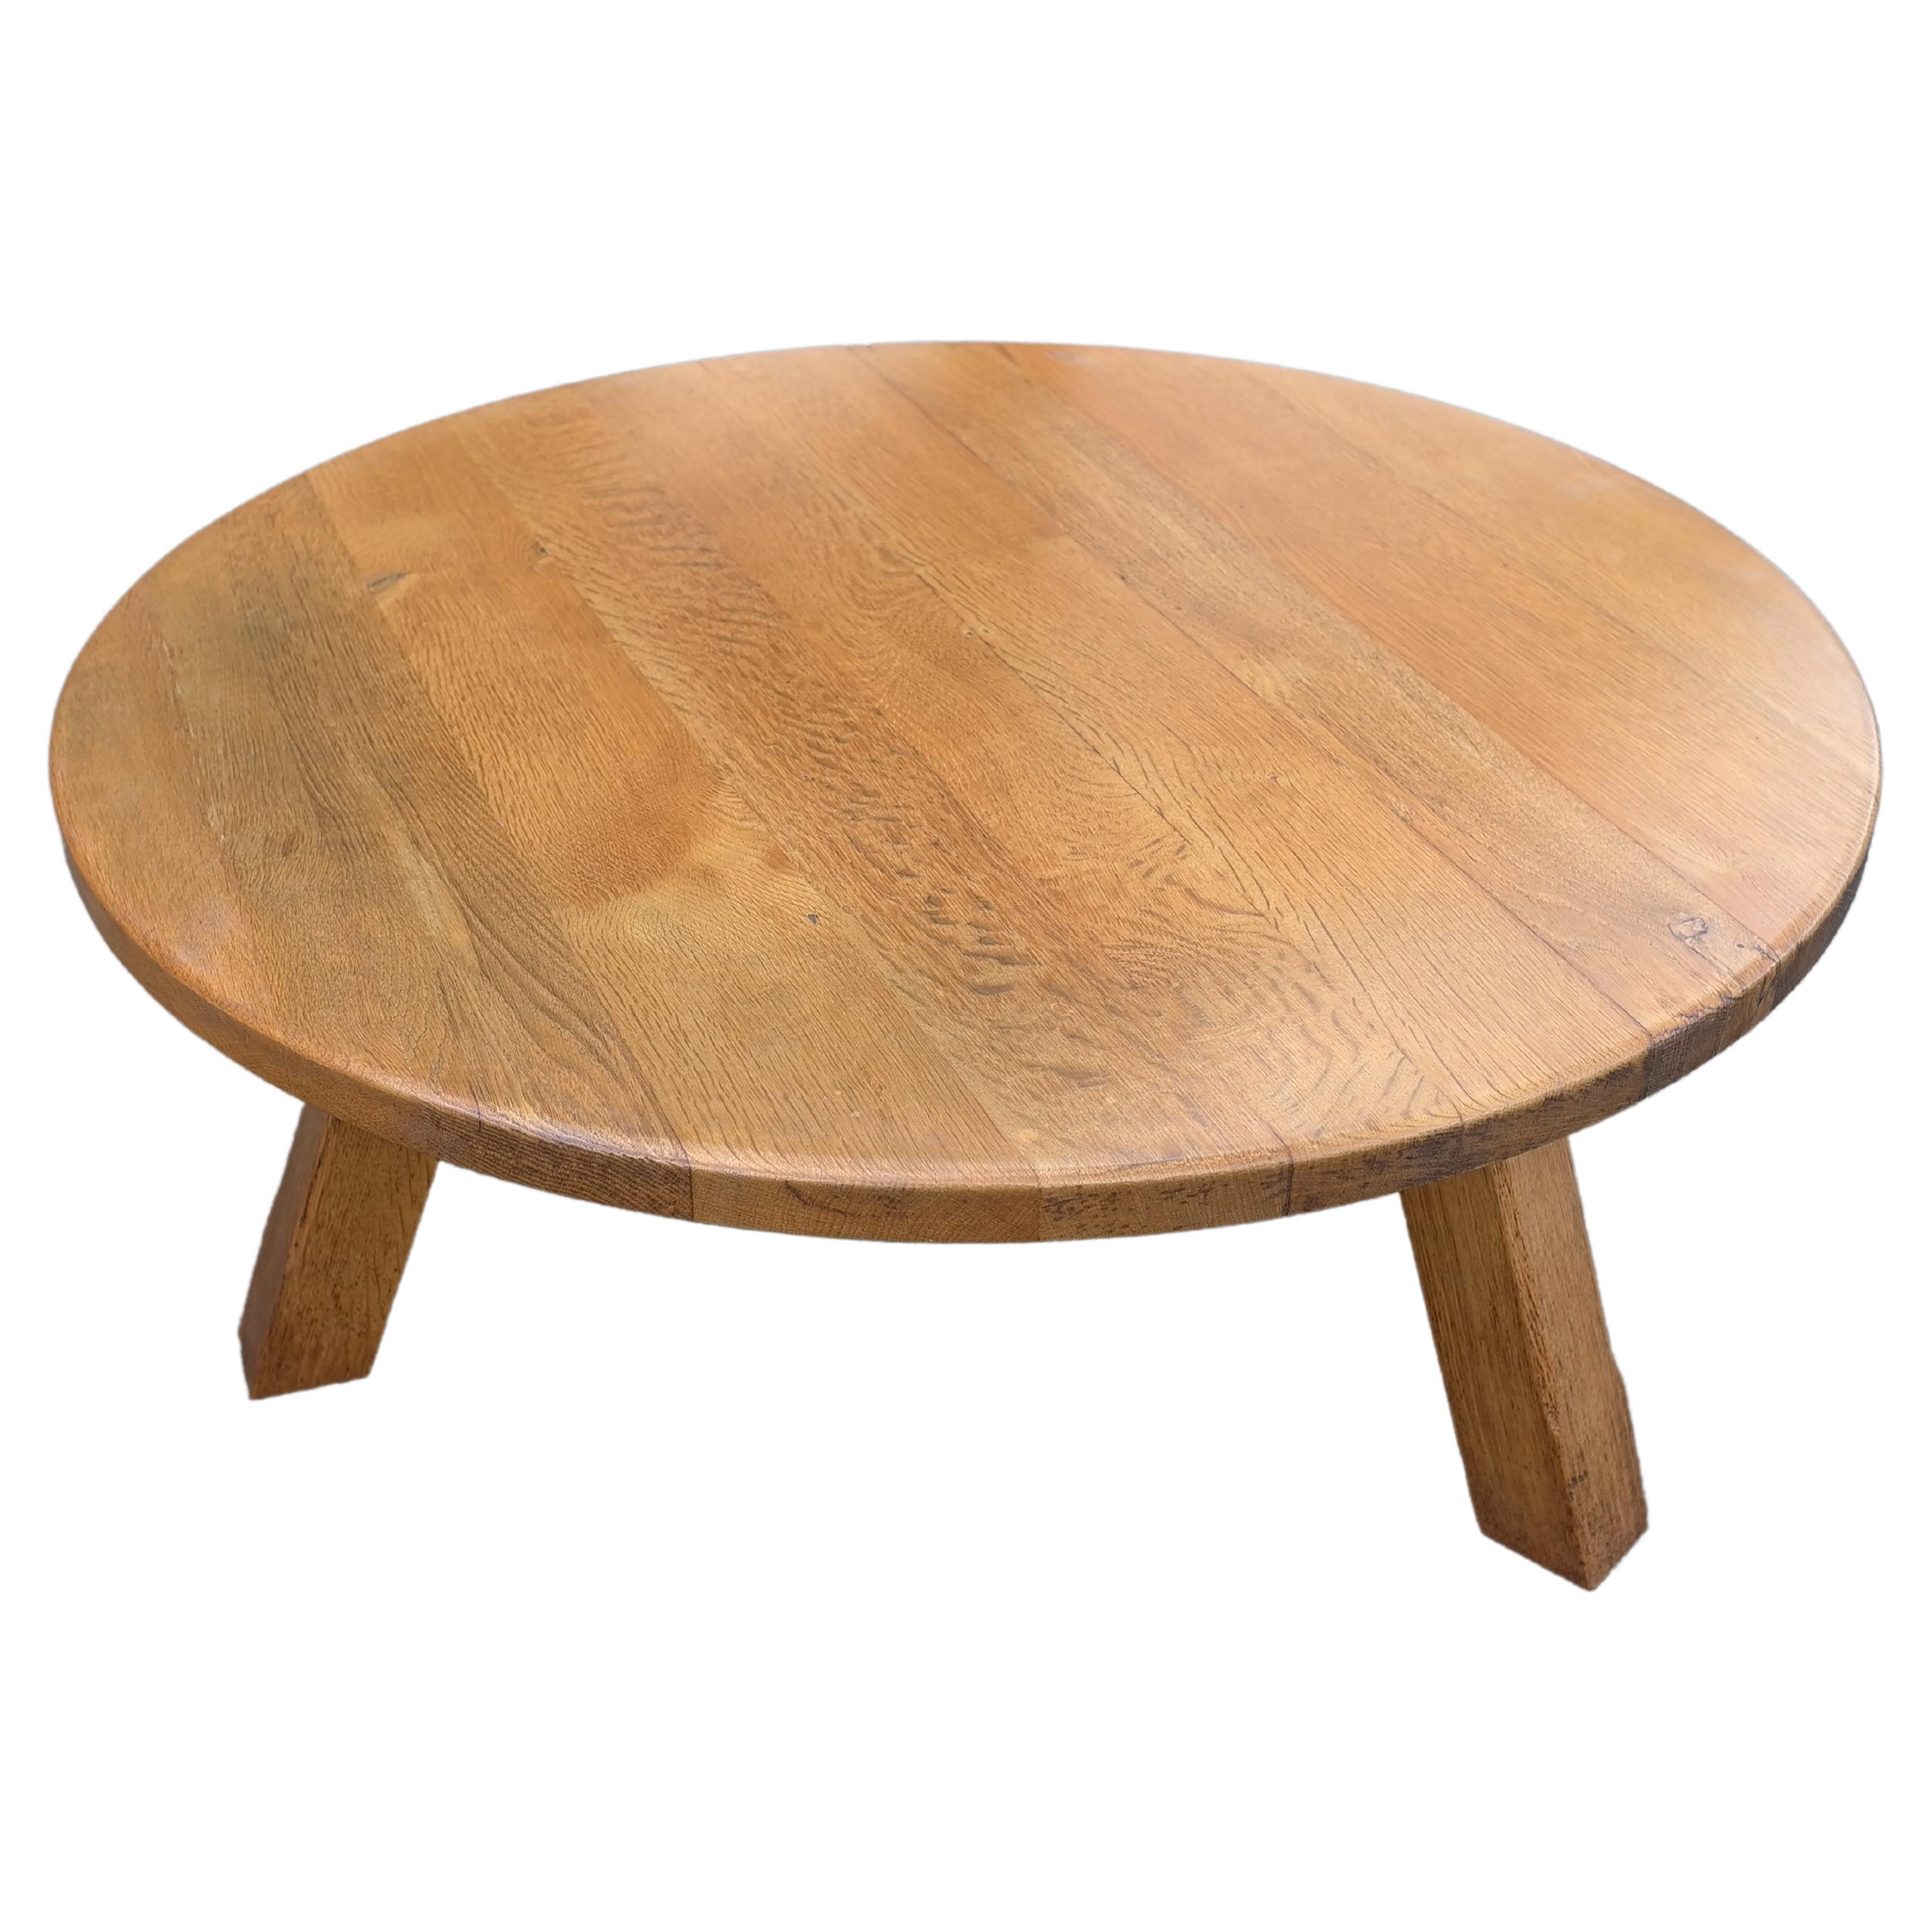 Solid oak round coffee table in style of Charlotte Perriand, France, 1960s.